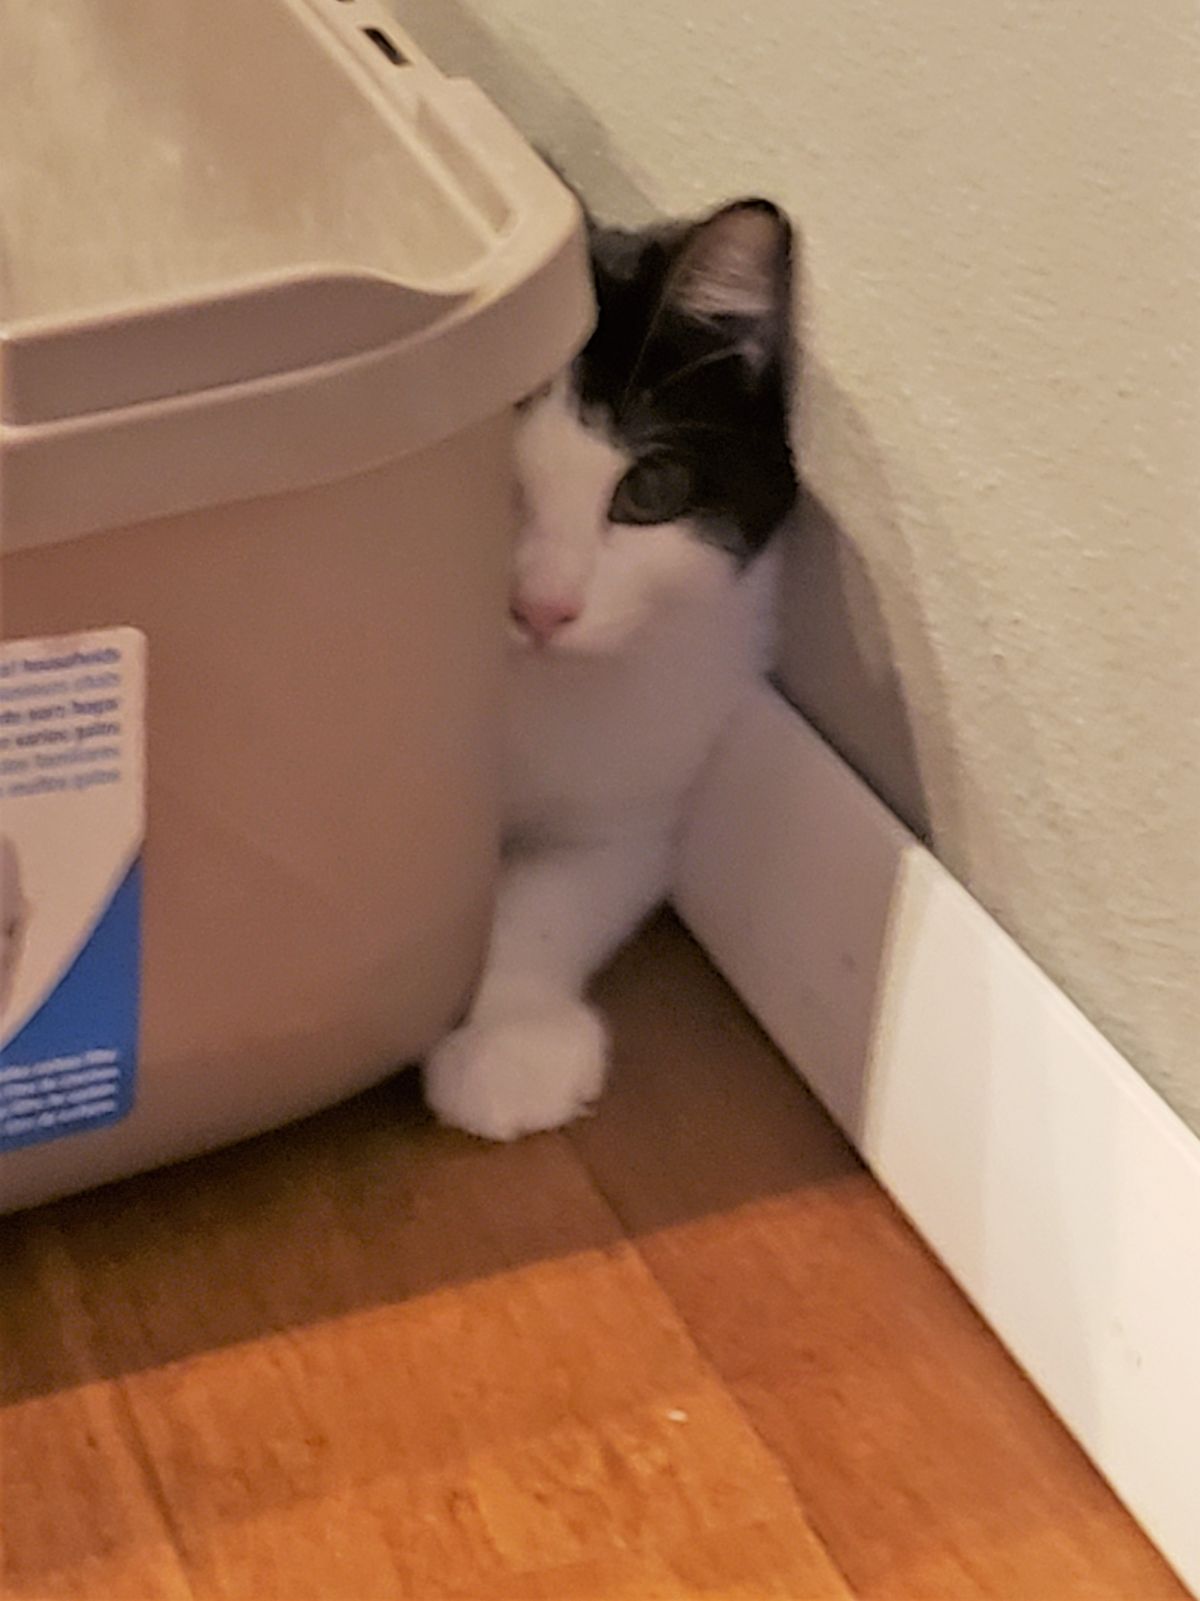 black and white cat peeks out from behind a litter box against the wall.